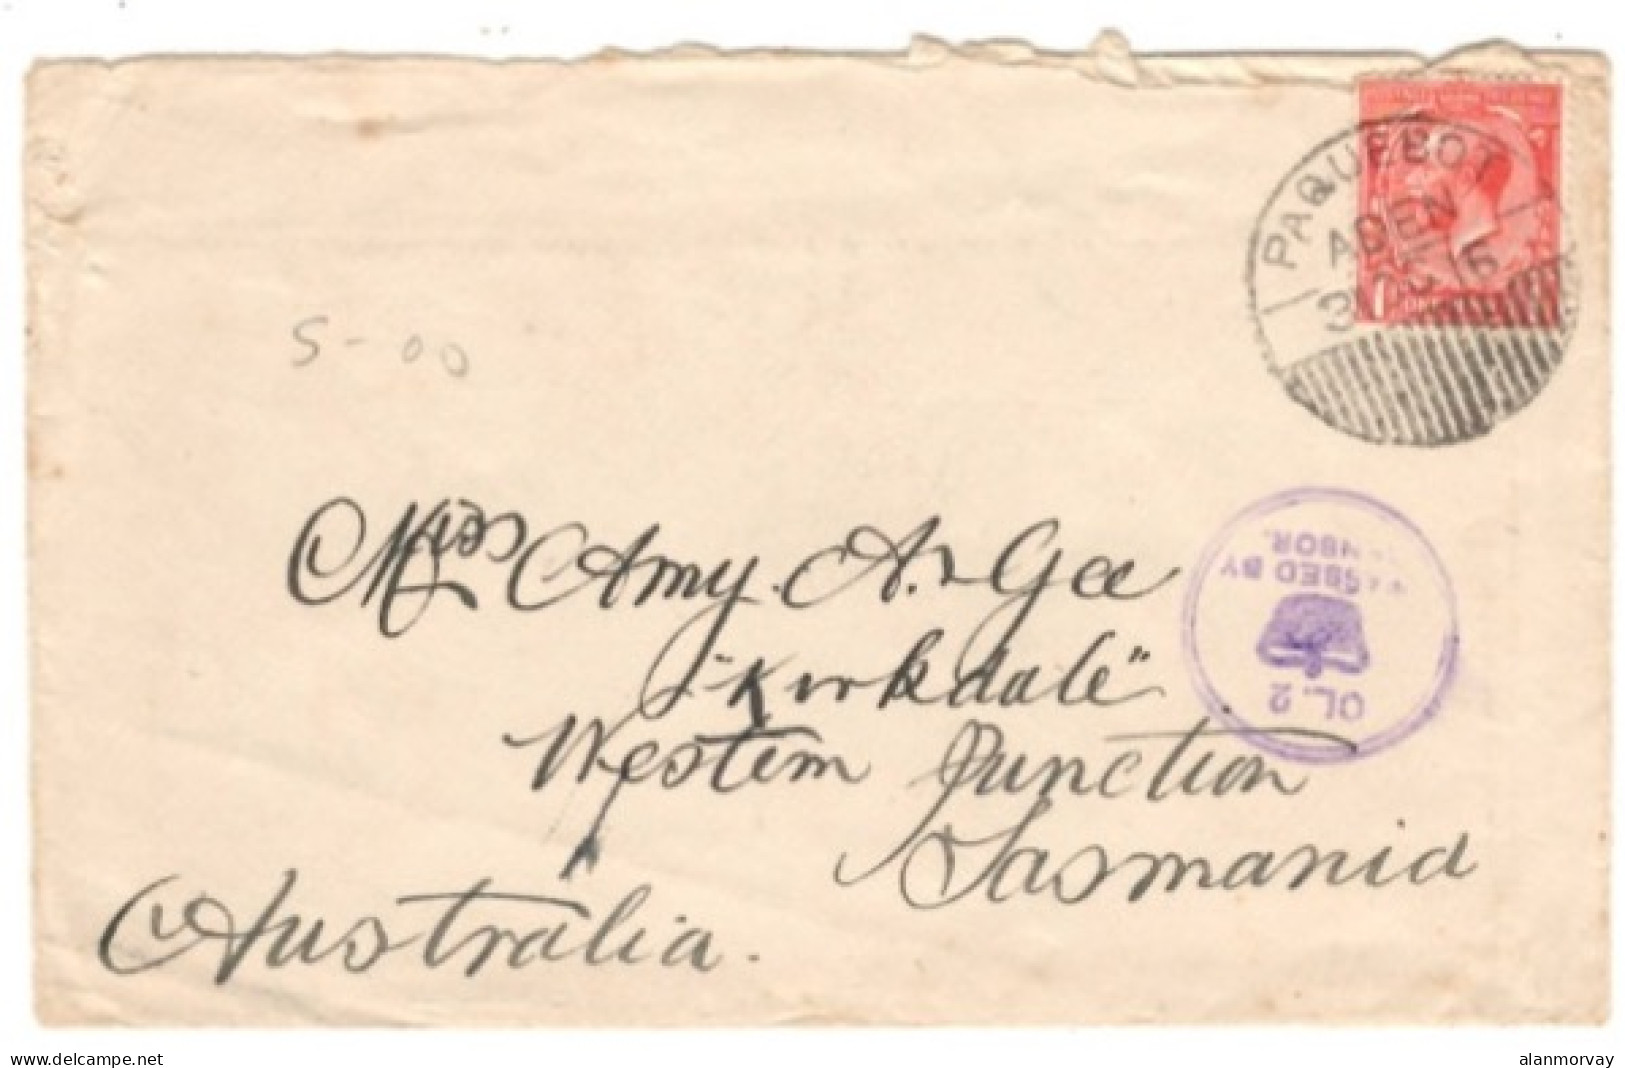 Aden - October 31, 1916 Aden Censored Cover To Australia With A Great Britain Stamp, Paquetbot Cancel, And Censor Mark - Aden (1854-1963)